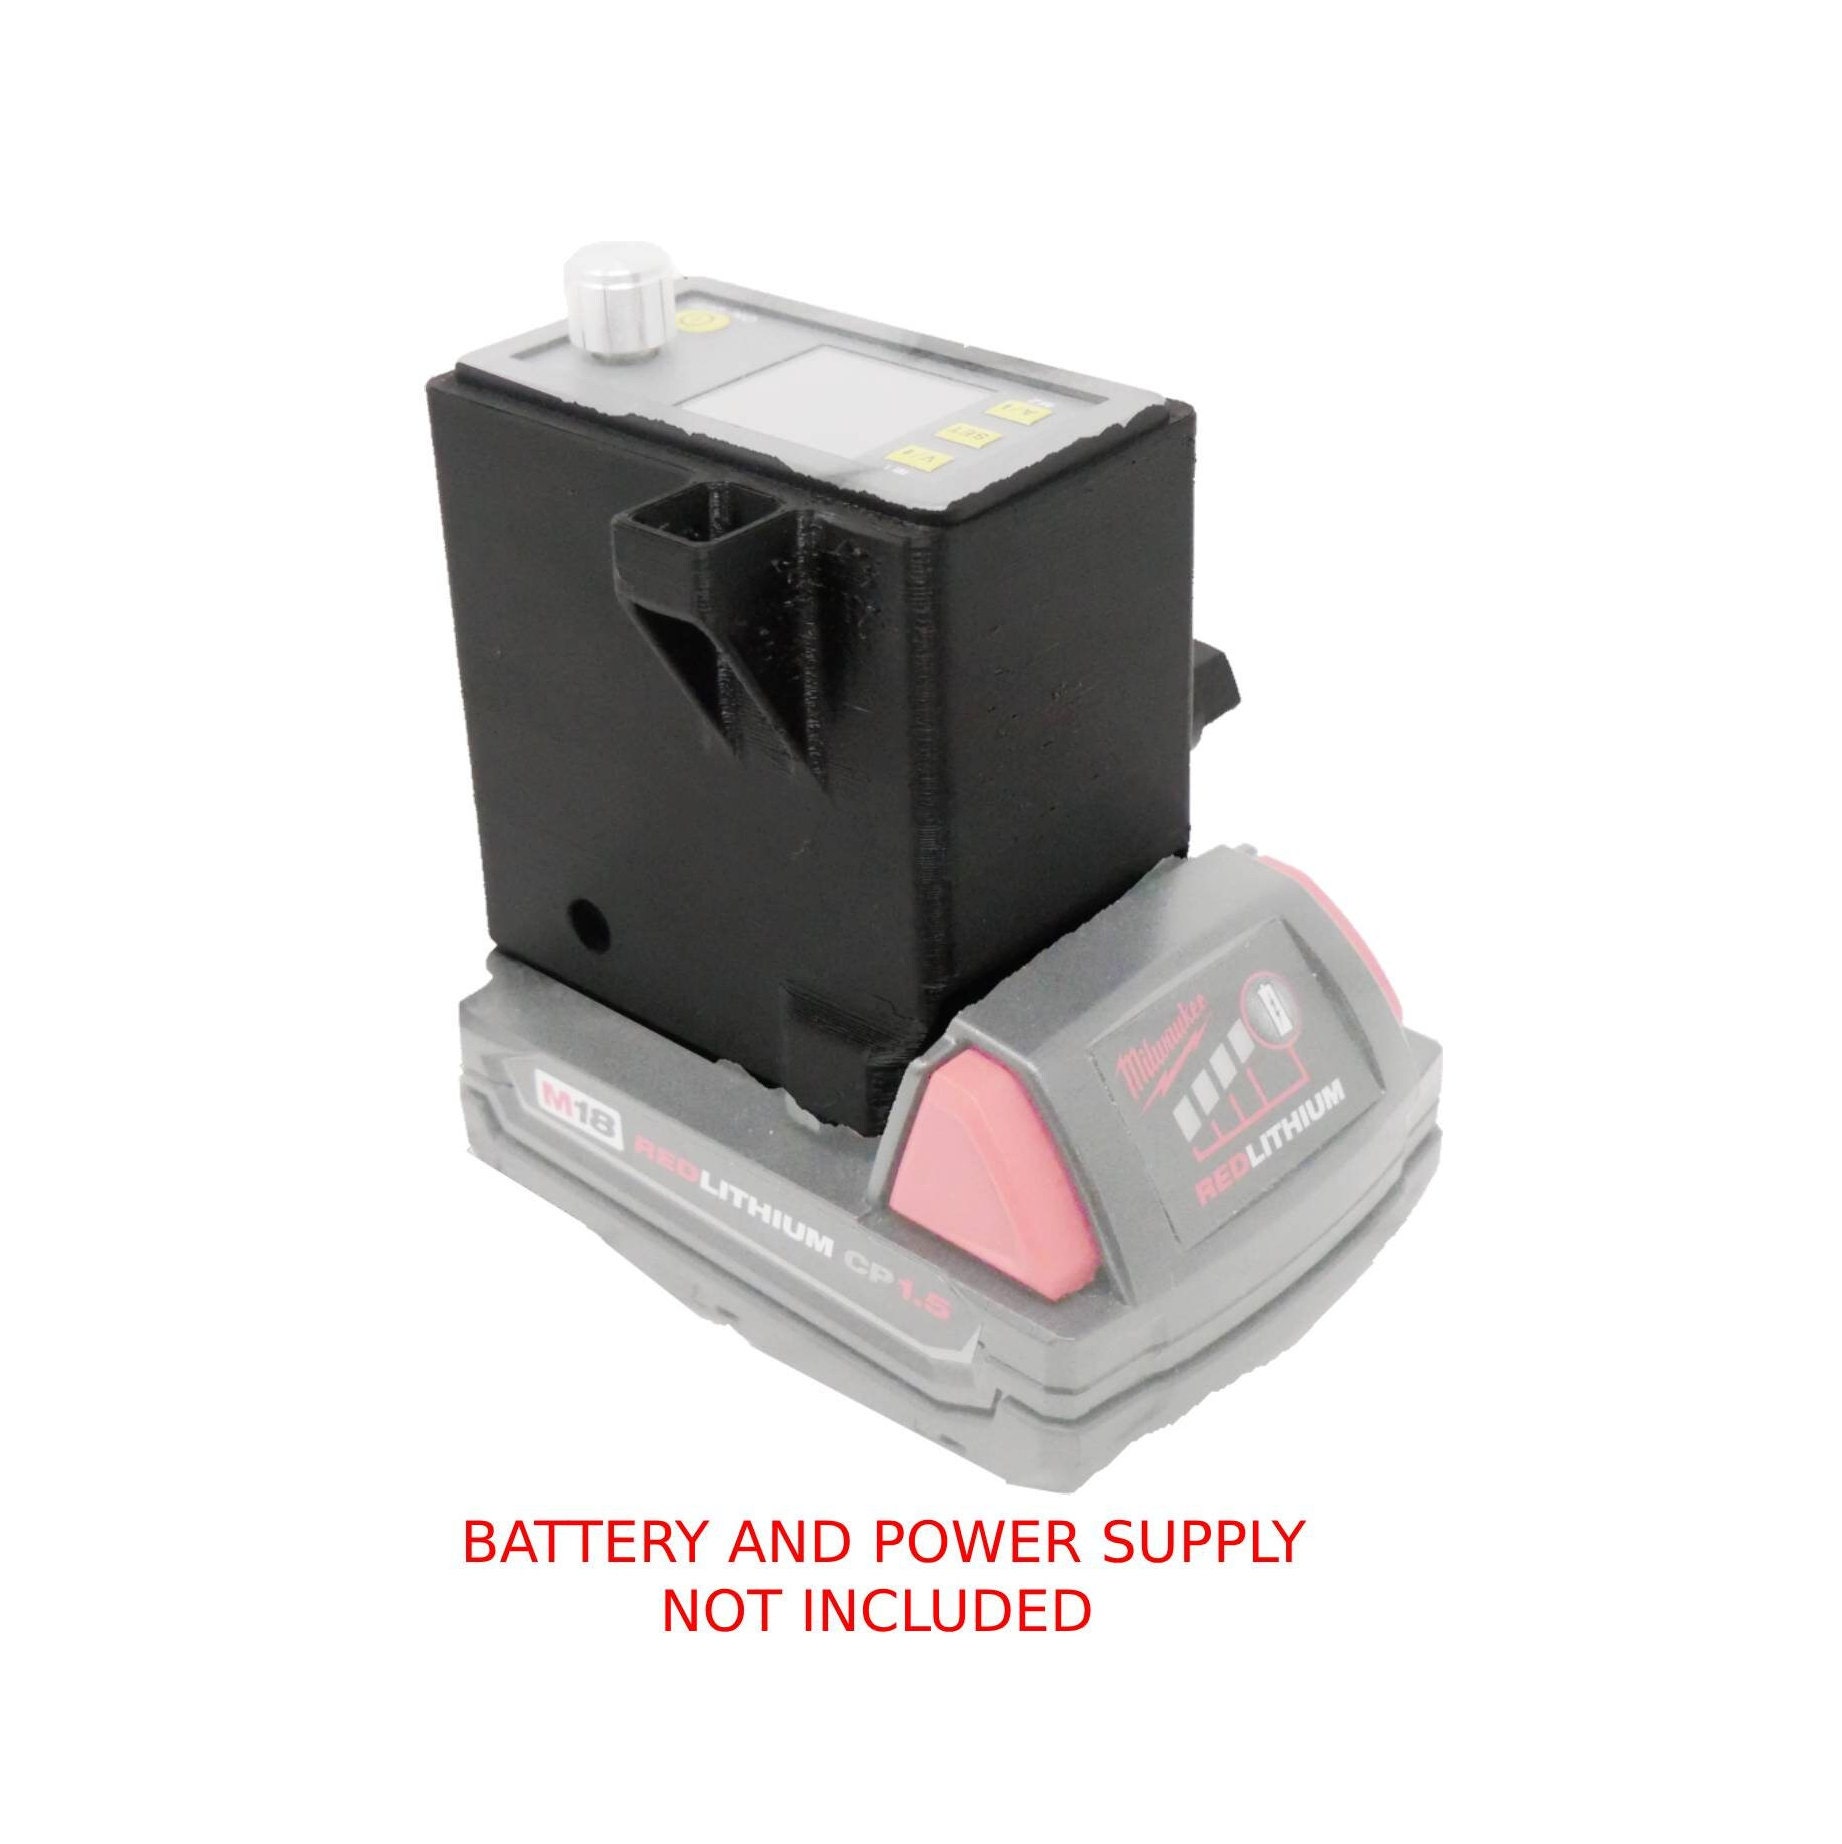 Can You Use An 18V Battery In A 24V Ryobi? Here's What You Should Know